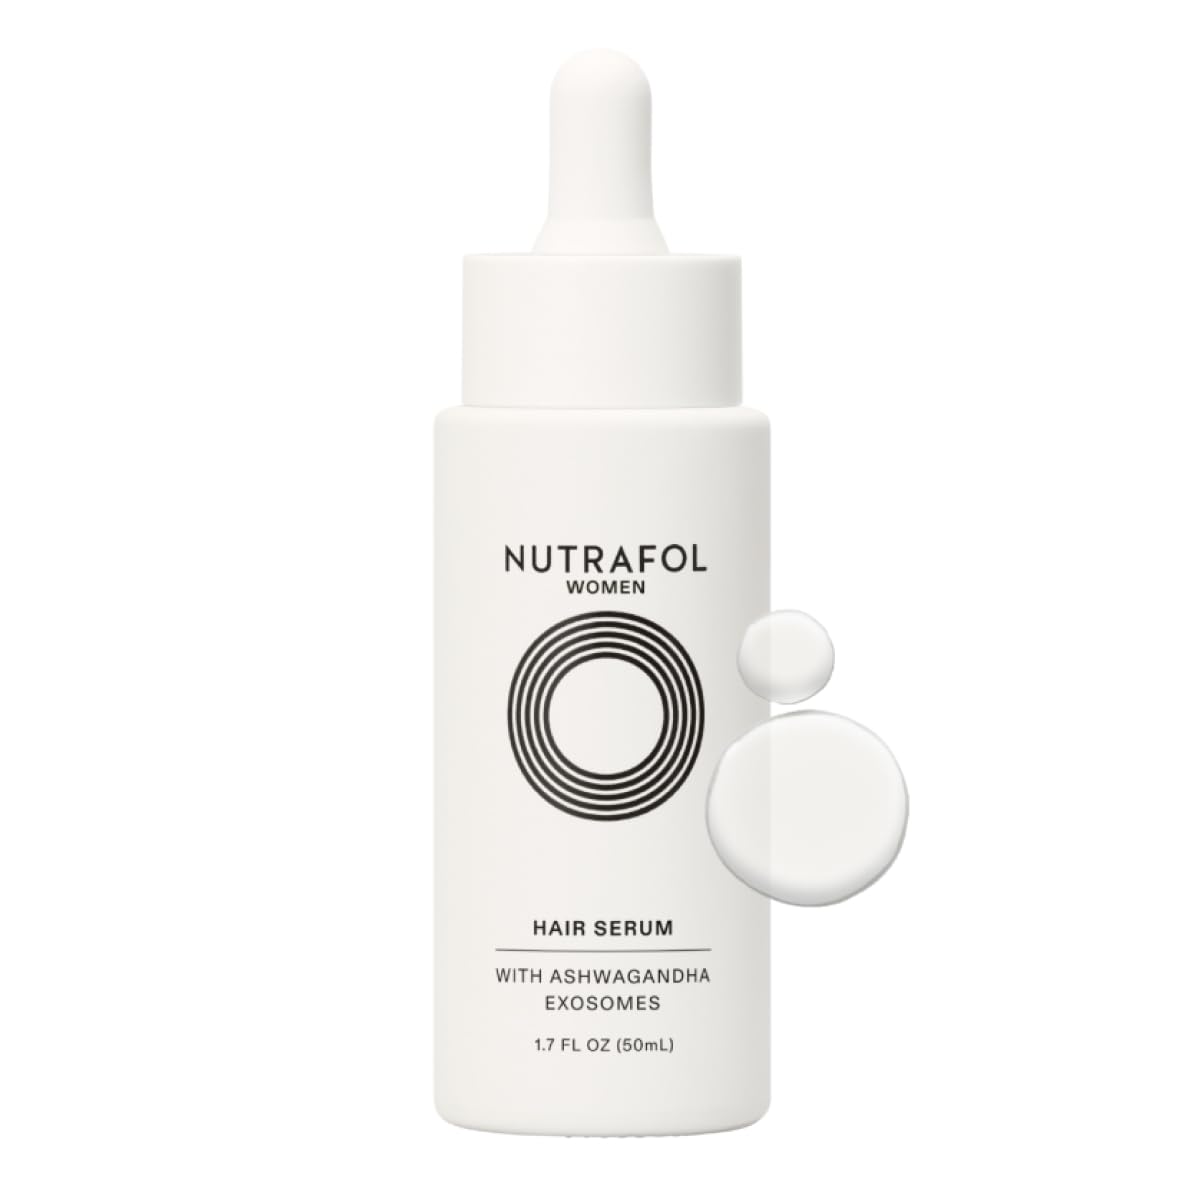 Nutrafol Women's Hair Serum, Supports Visibly Thicker a...